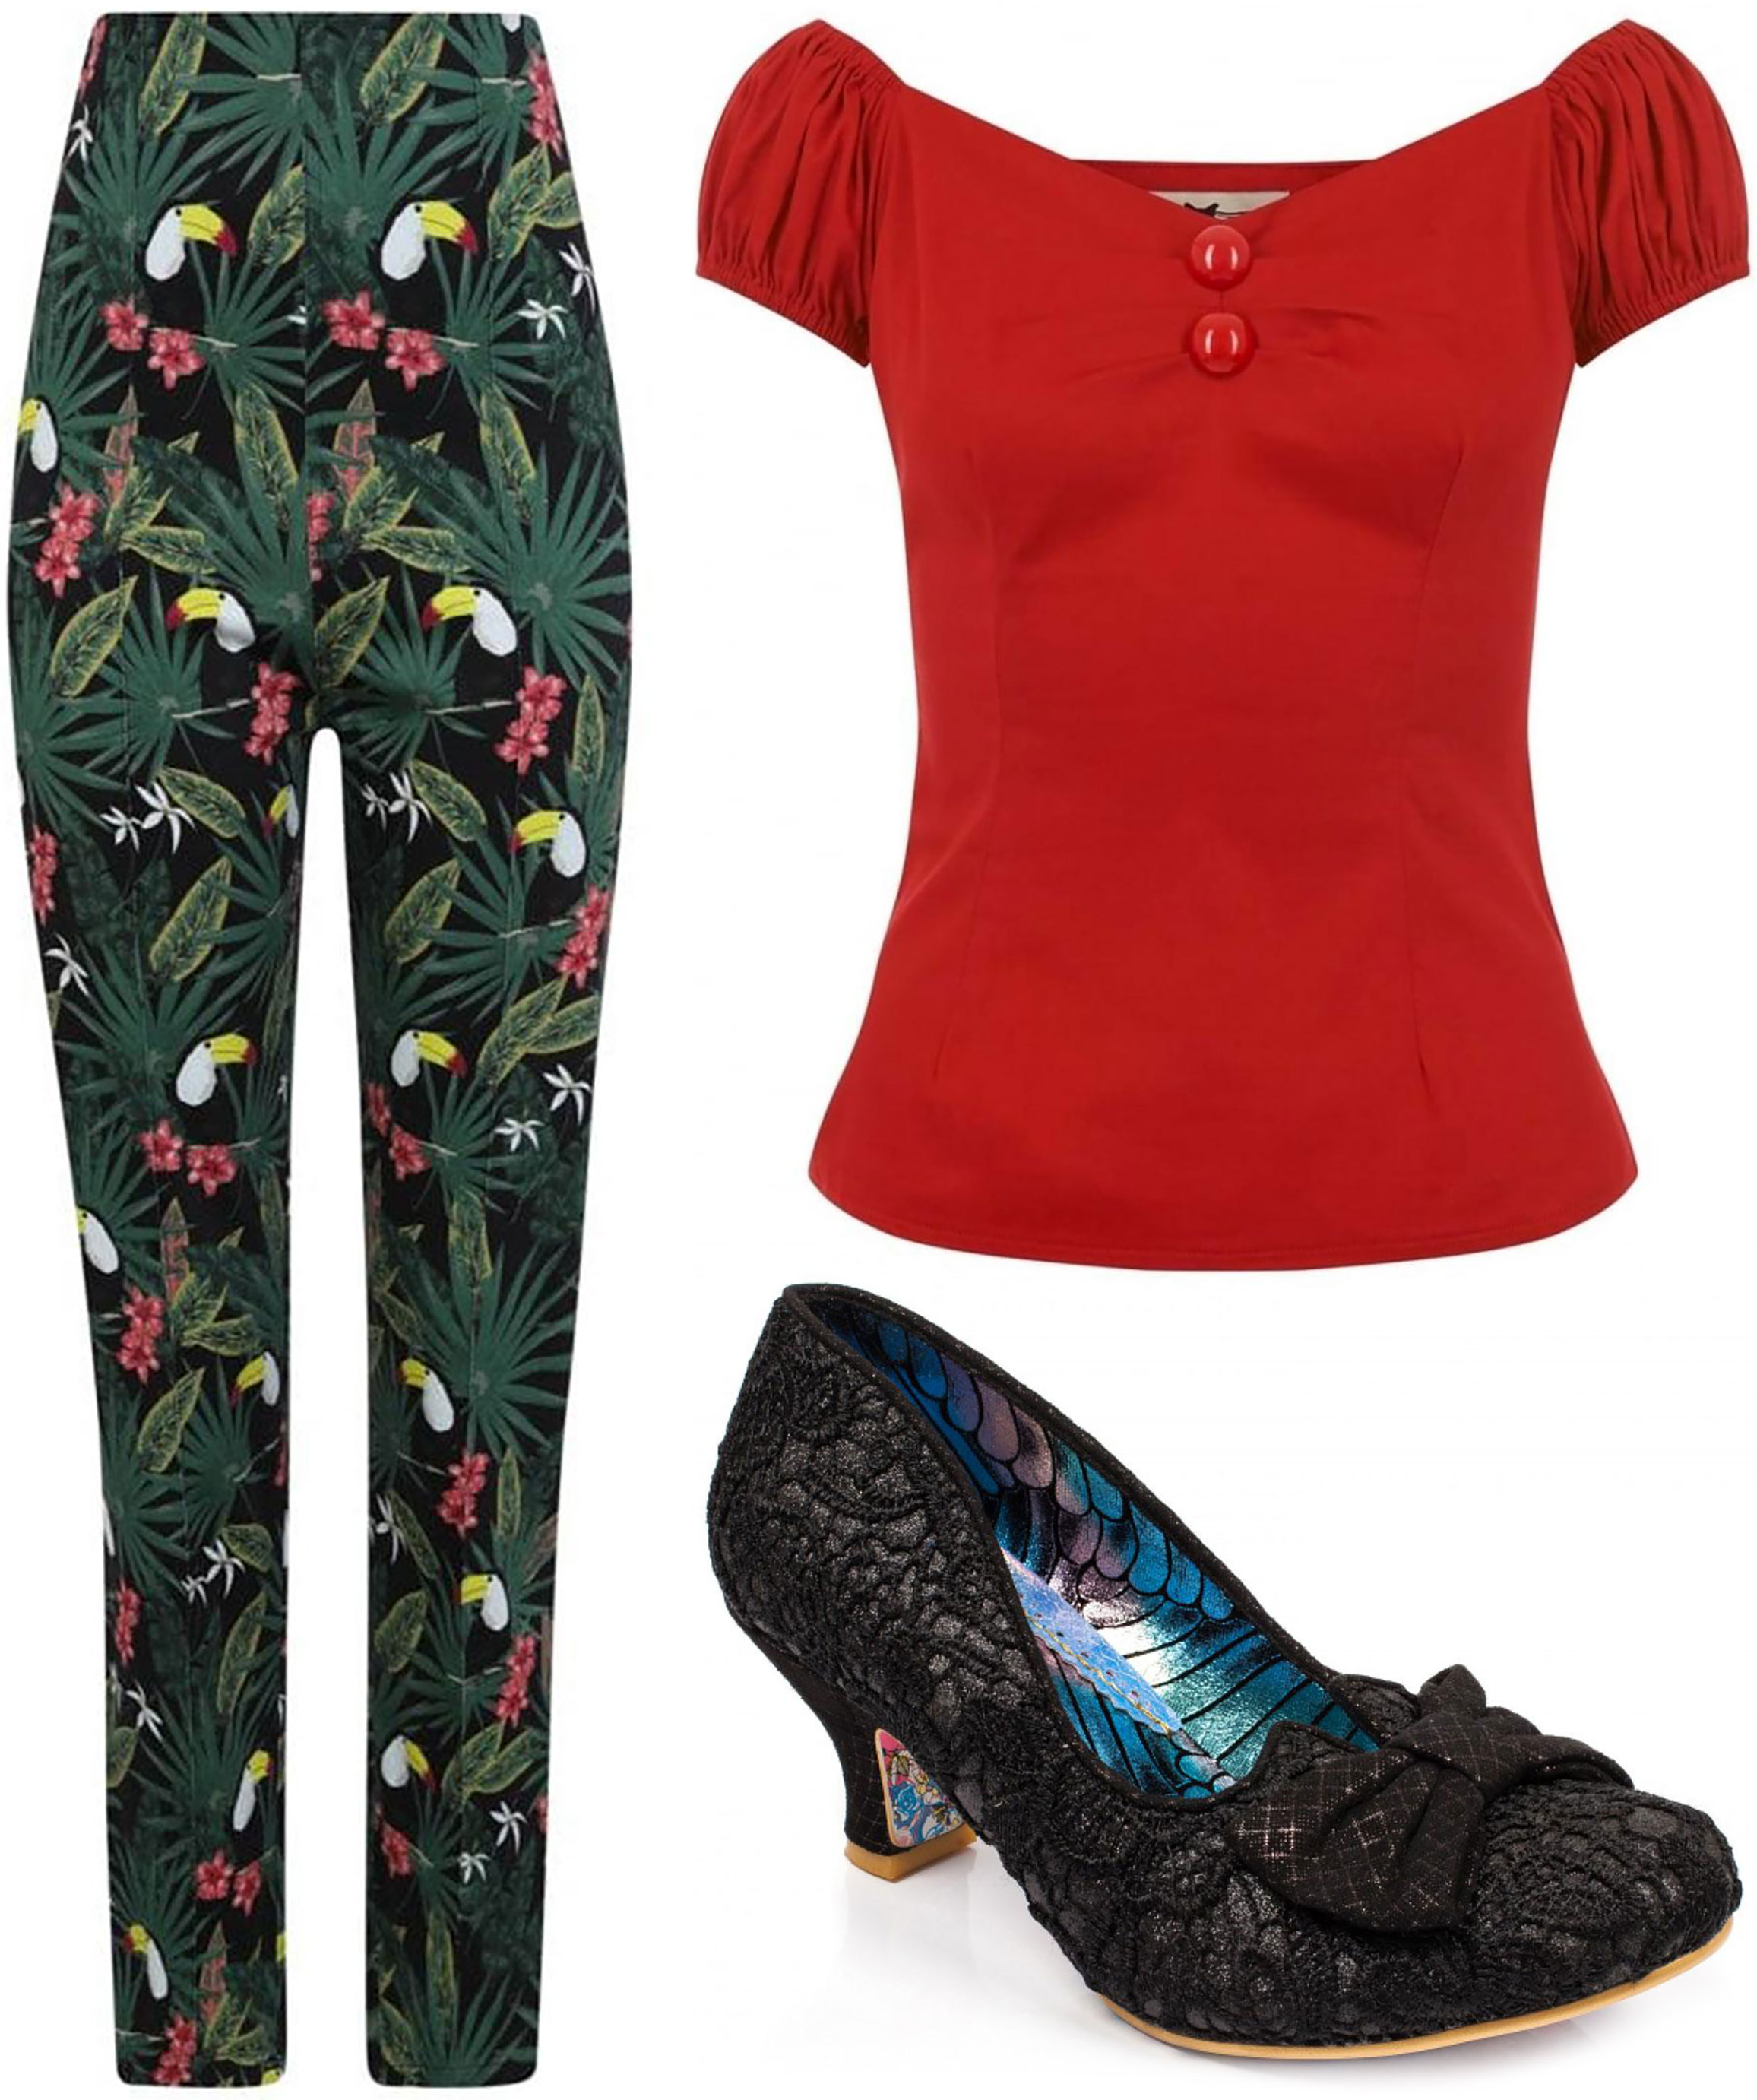 Collectif 'Bonnie' trousers with 'Dolores' top and Irregular Choice 'Razzle Dazzle' heels